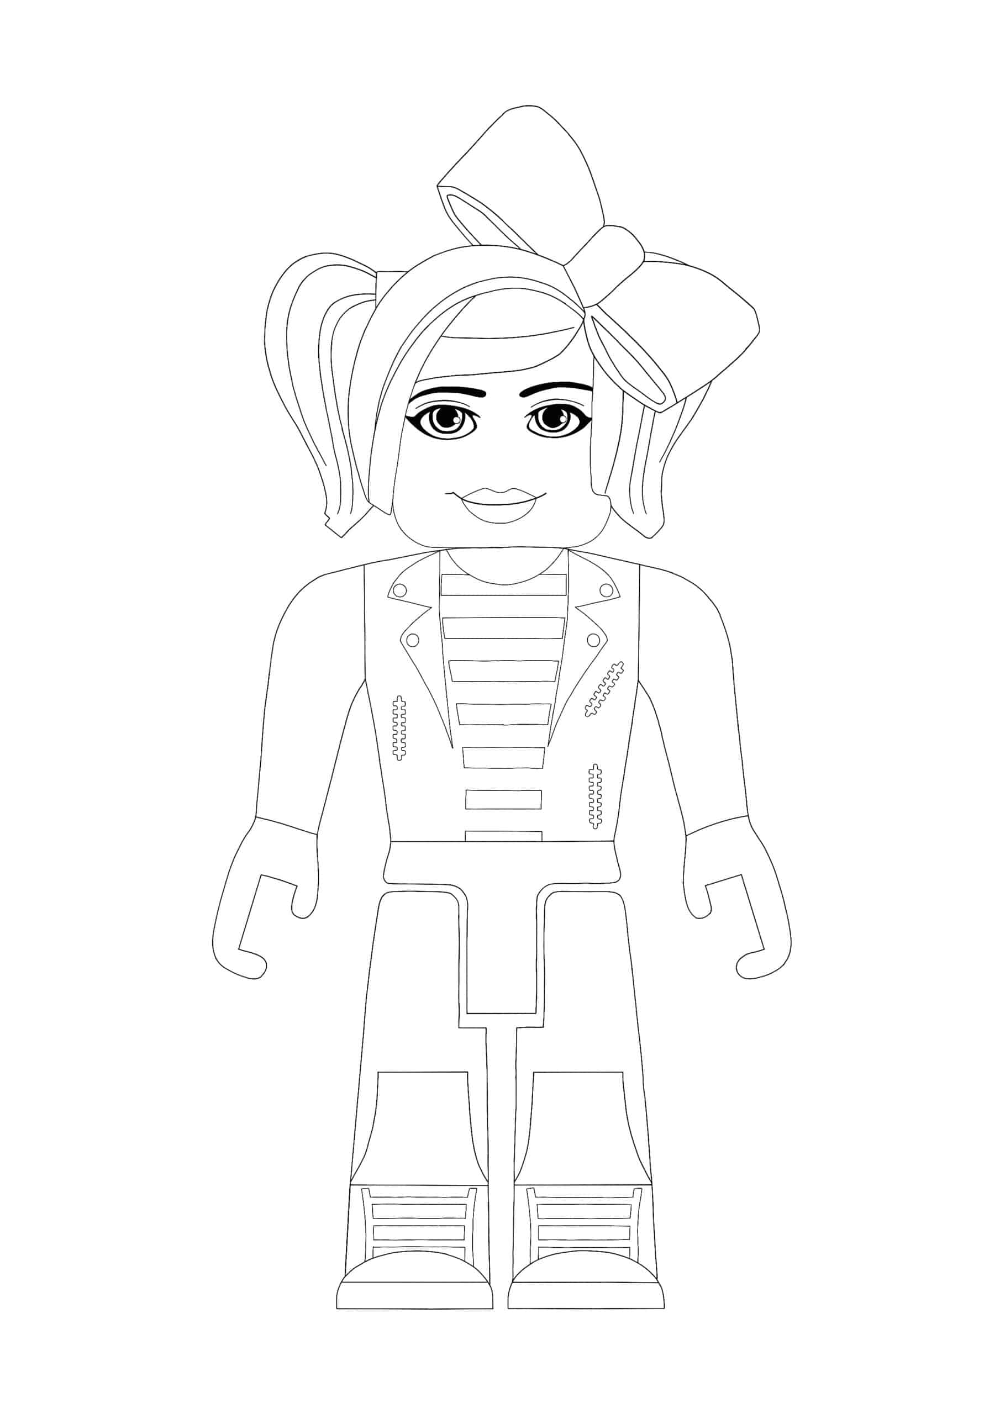 Roblox Girl Coloring Pages   20 Free Coloring Sheets 200201 ...